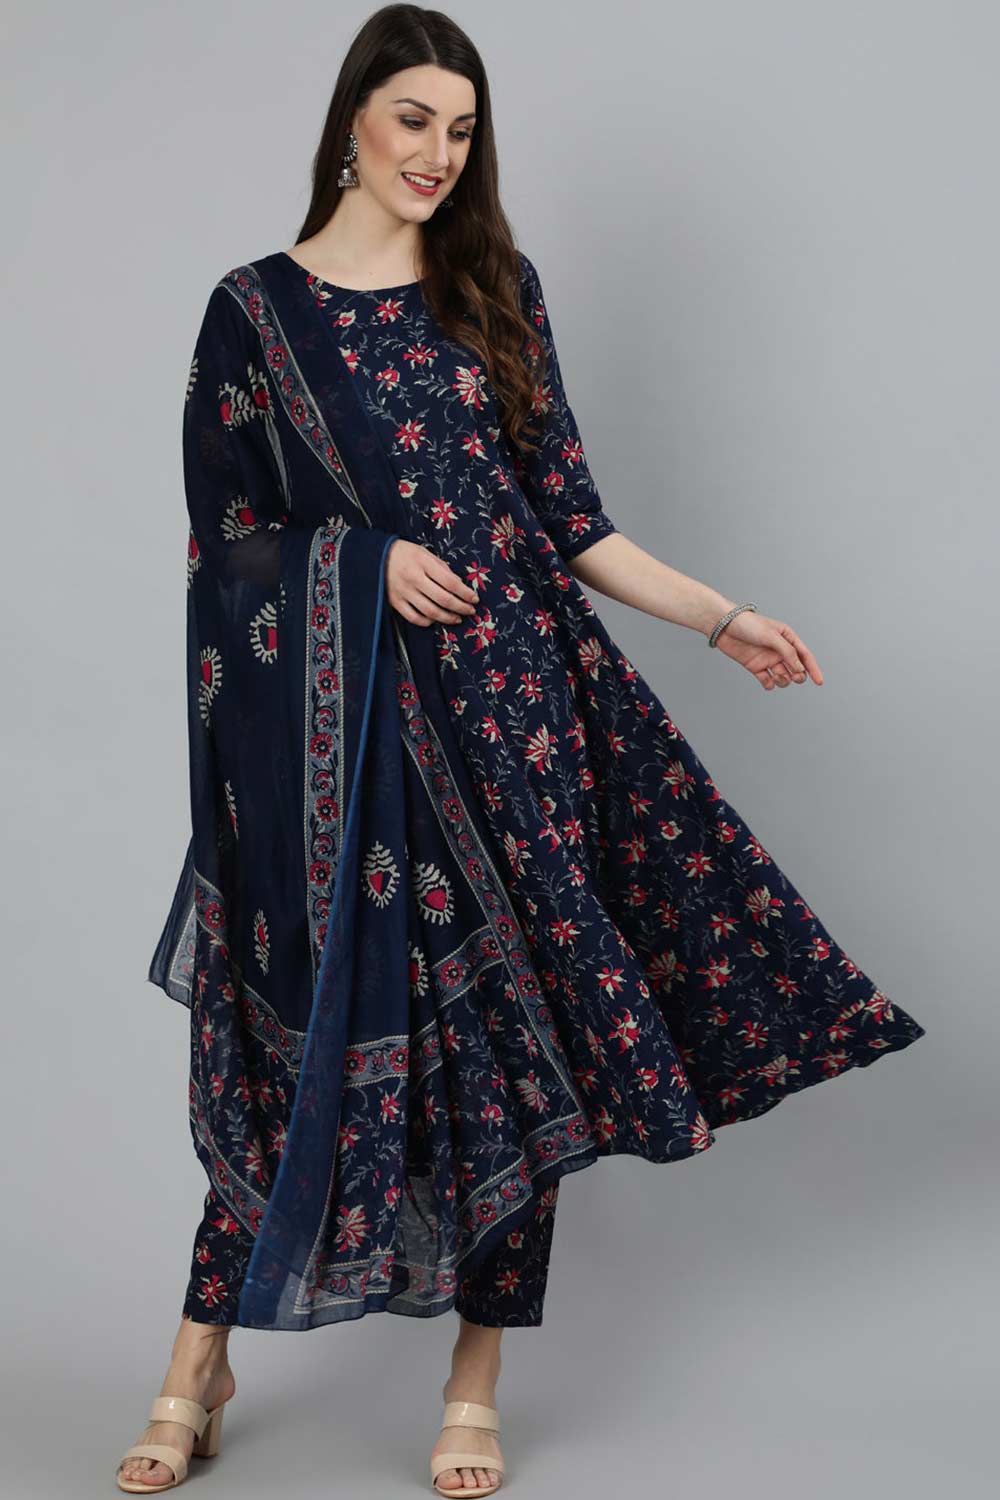 Buy Navy Blue And Pink Floral Printed Flared Pant Suit Set Online